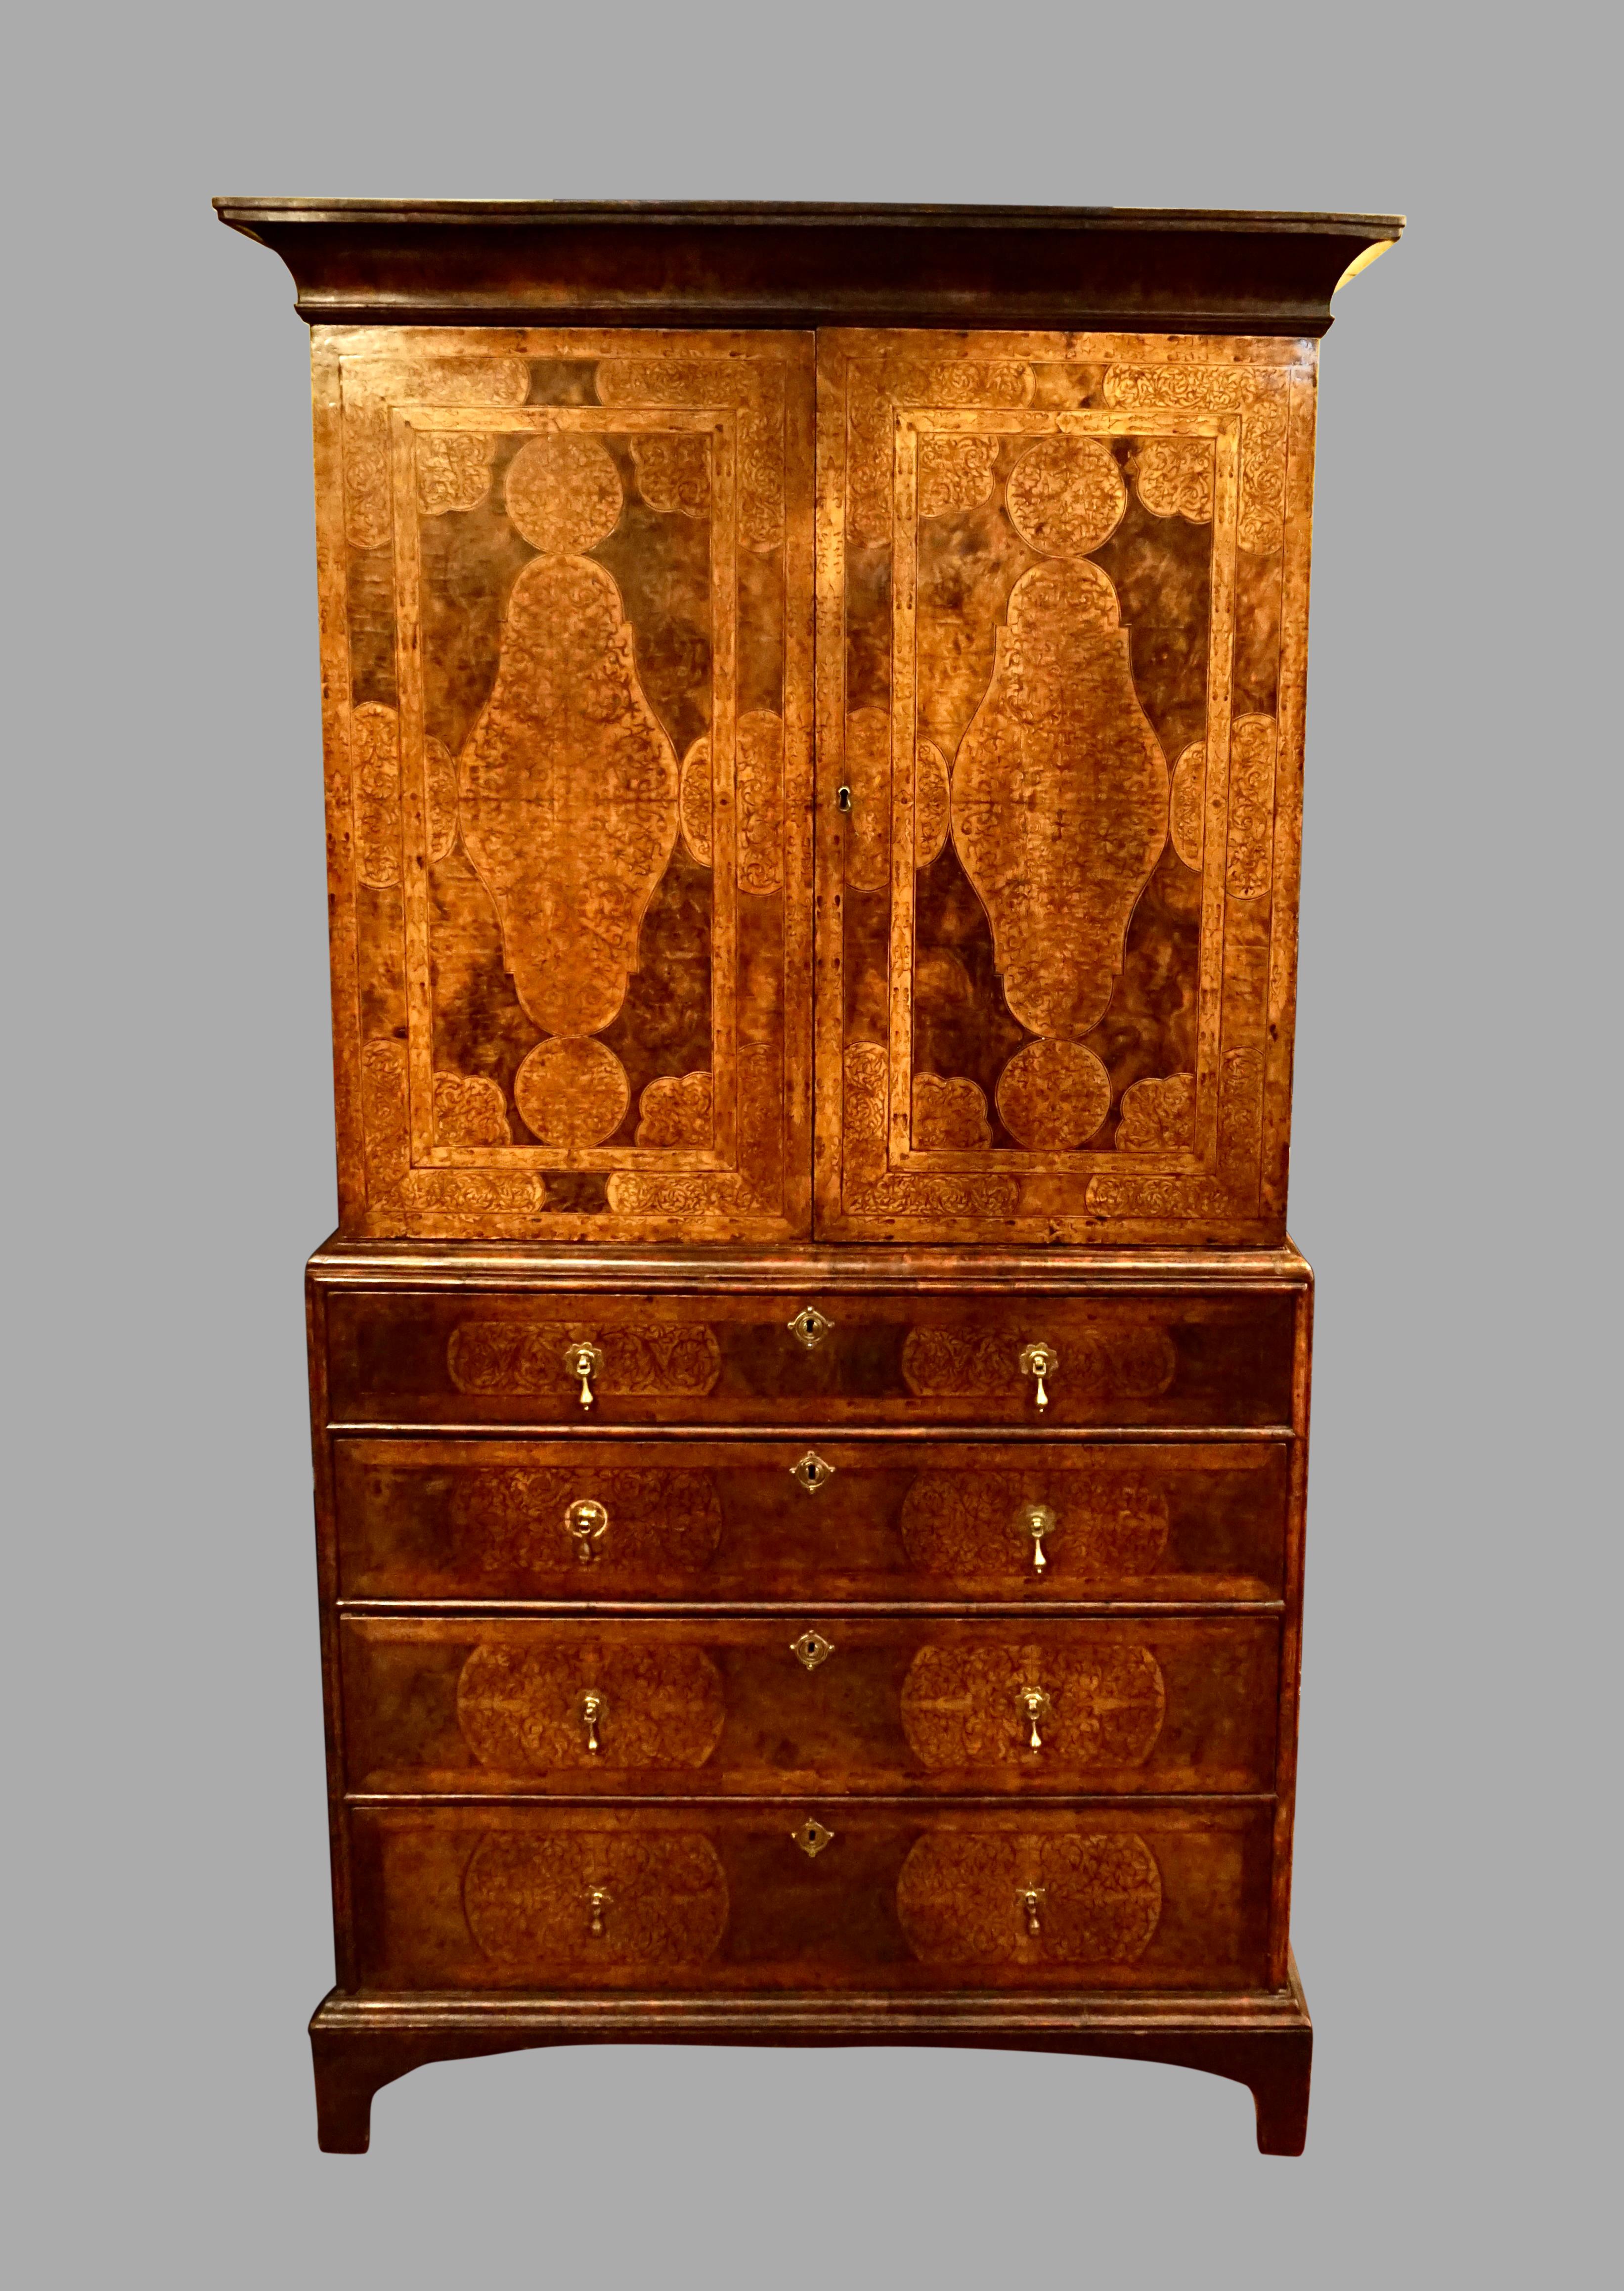 An elegant and rare Queen Anne period marquetry inlaid walnut cabinet-on-chest in two parts, the upper section with cabinet doors opening to reveal three adjustable shelves, the base, consisting of four graduated marquetry inlaid drawers supported